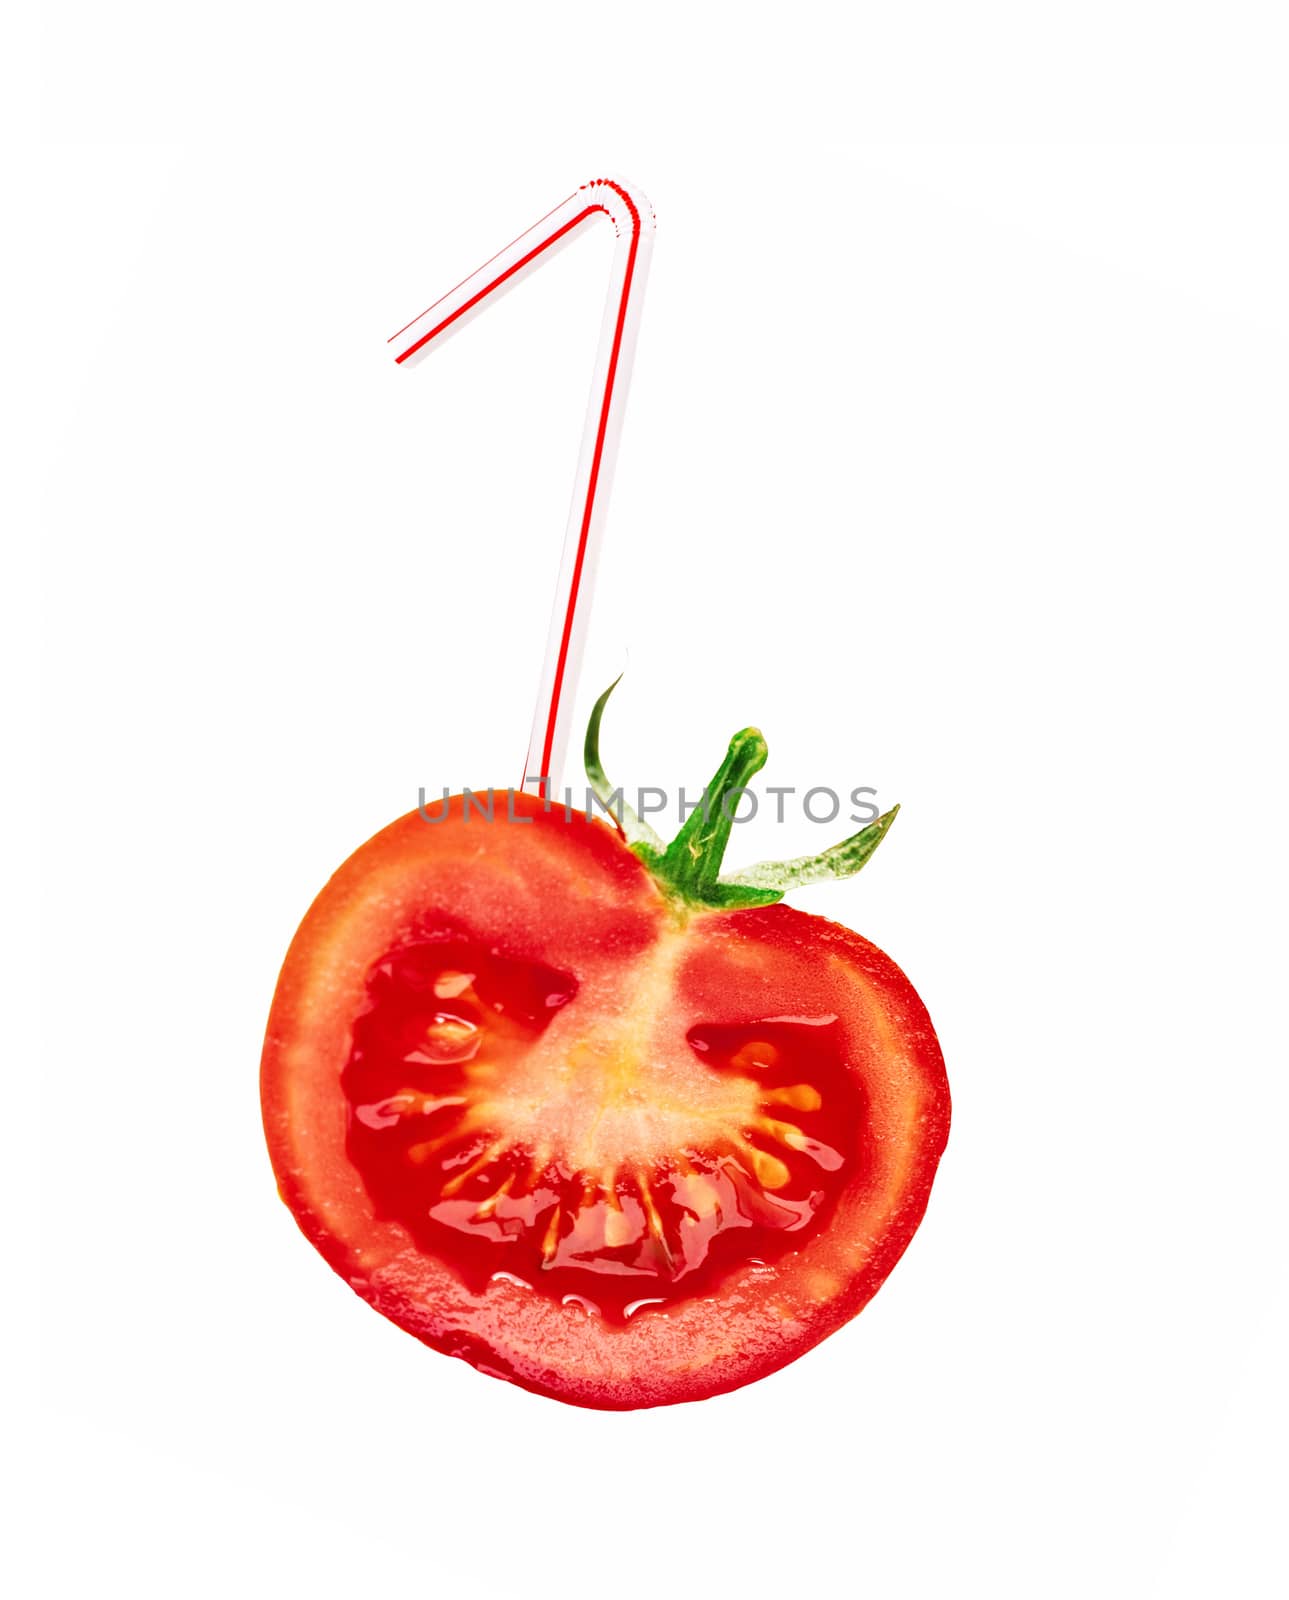 Tomato slice with cocktail stick